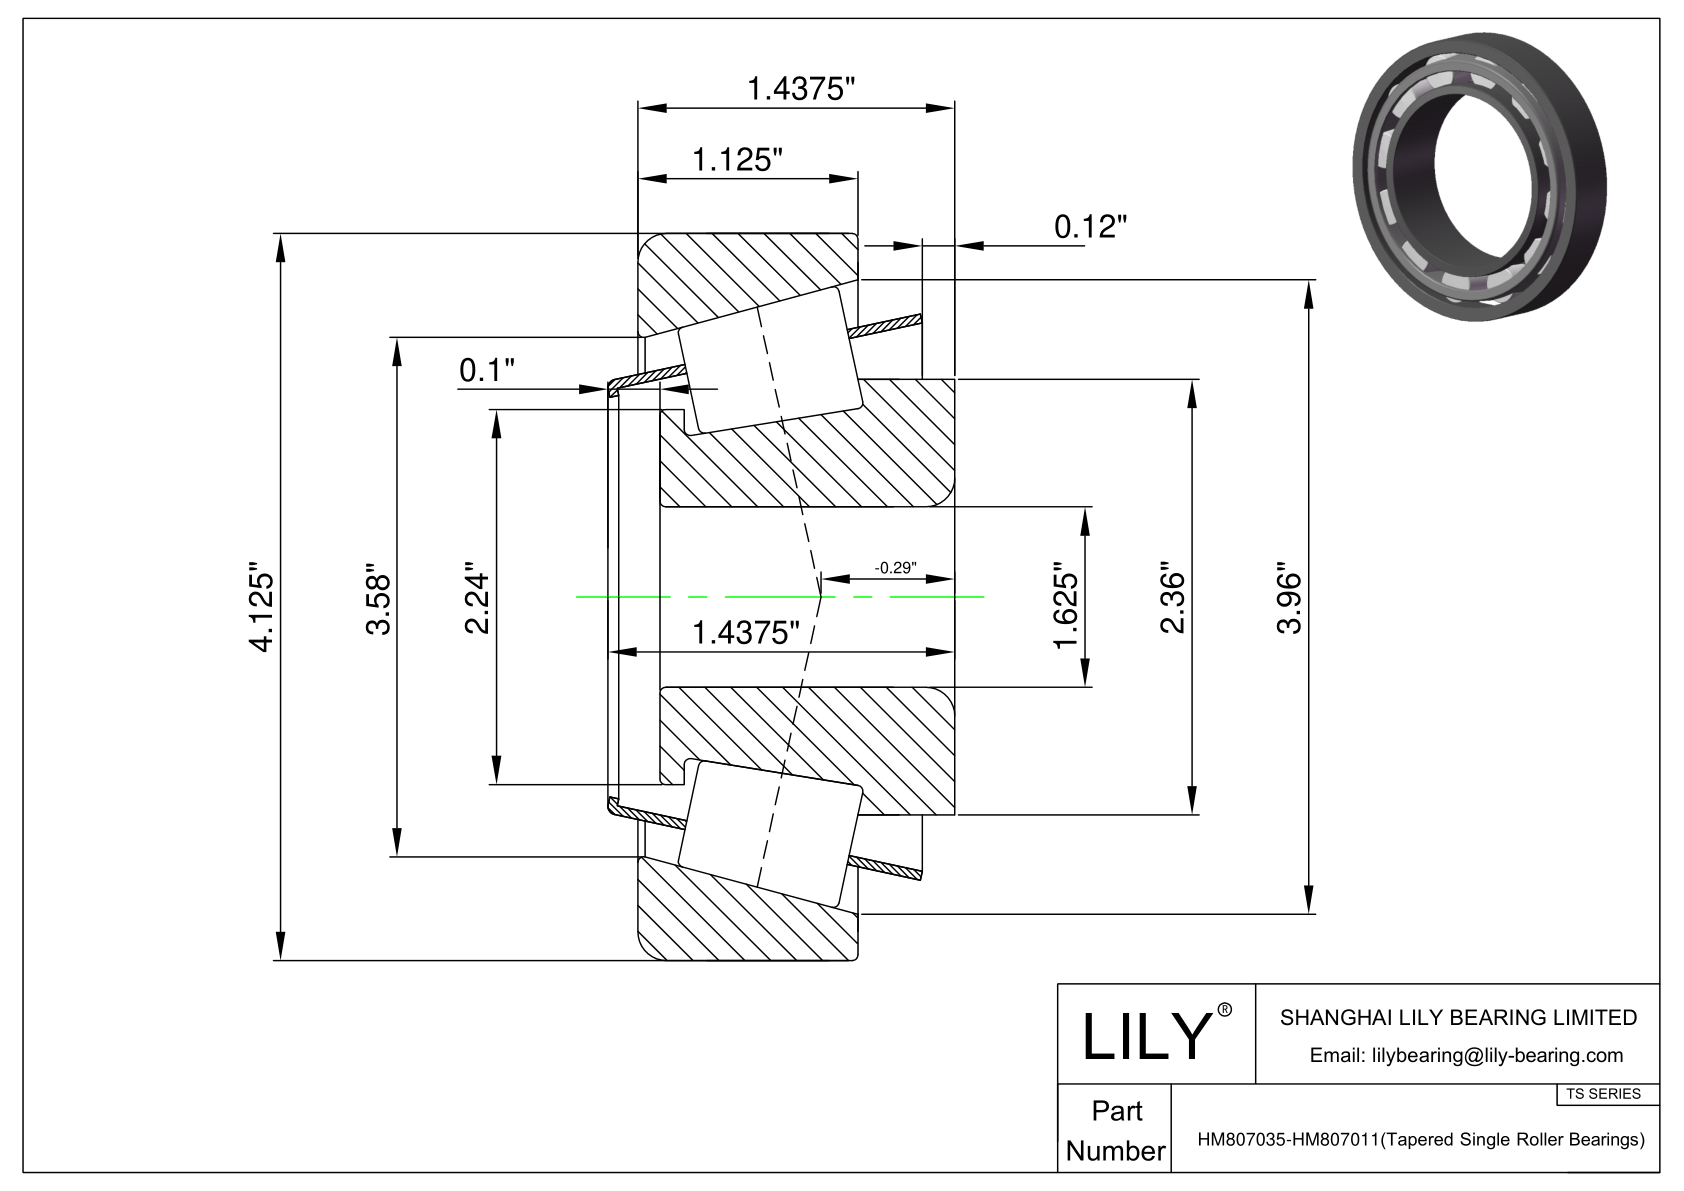 HM807035-HM807011 TS (Tapered Single Roller Bearings) (Imperial) cad drawing